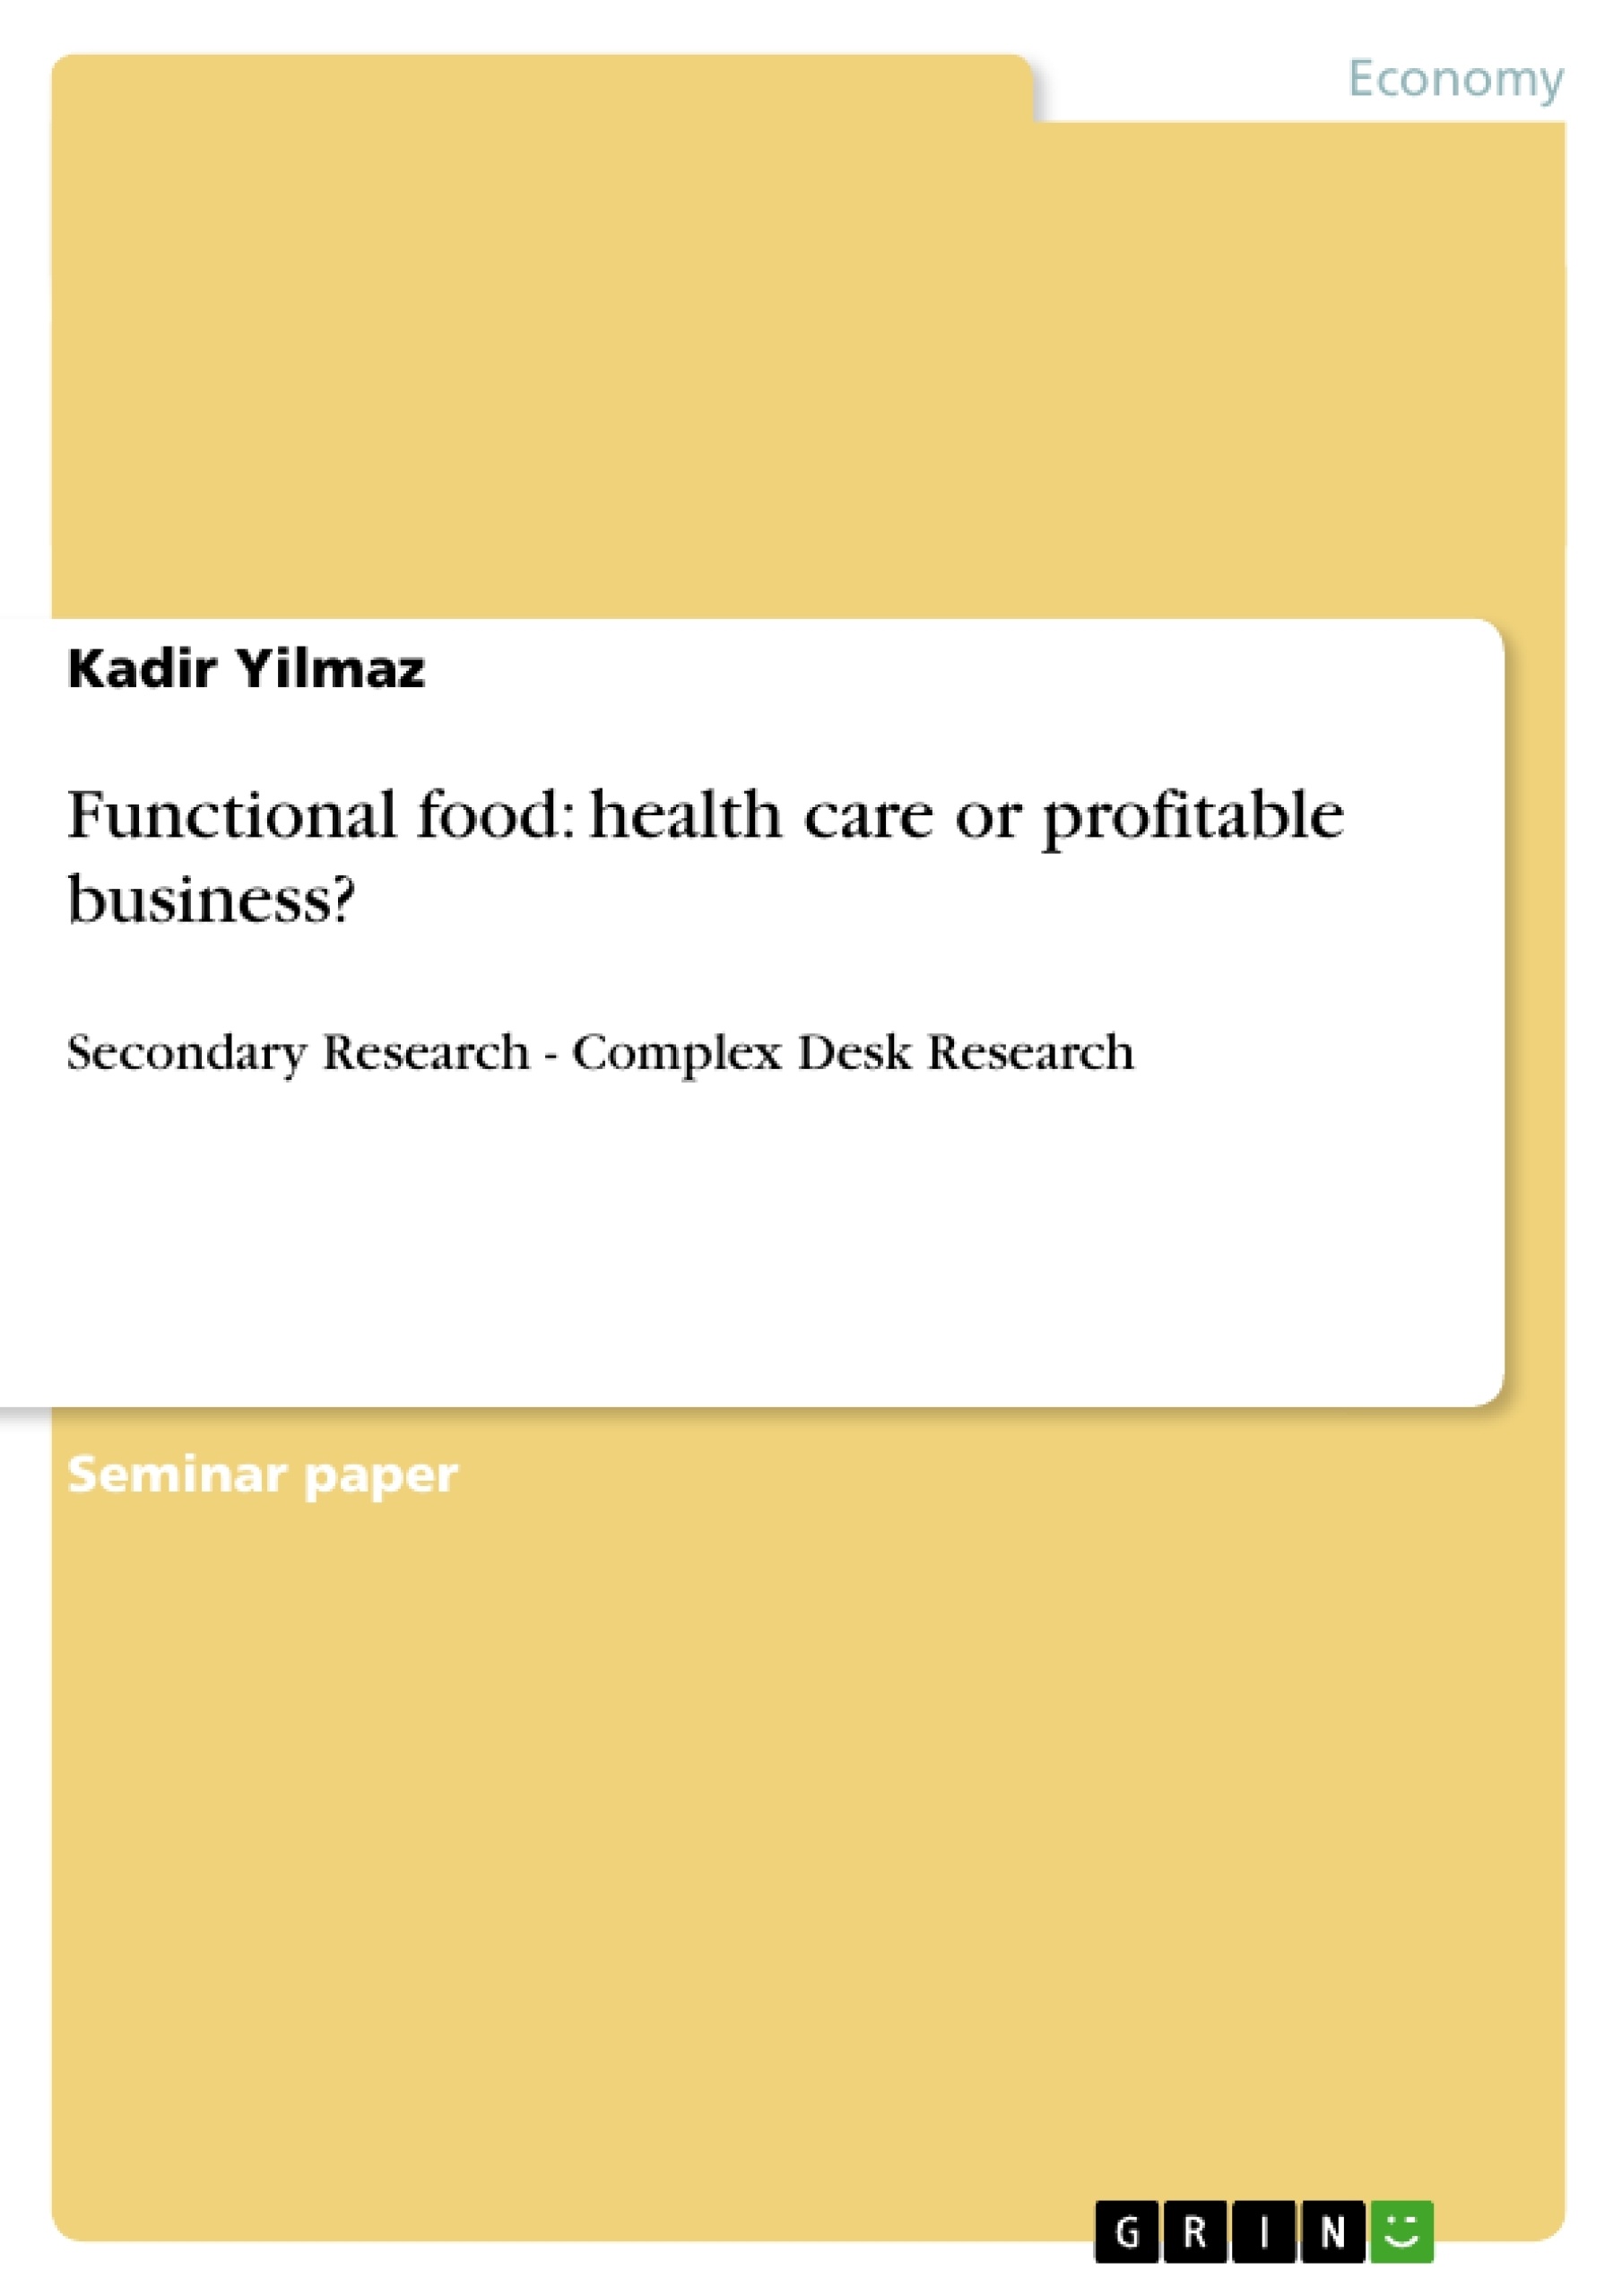 Title: Functional food: health care or profitable business?